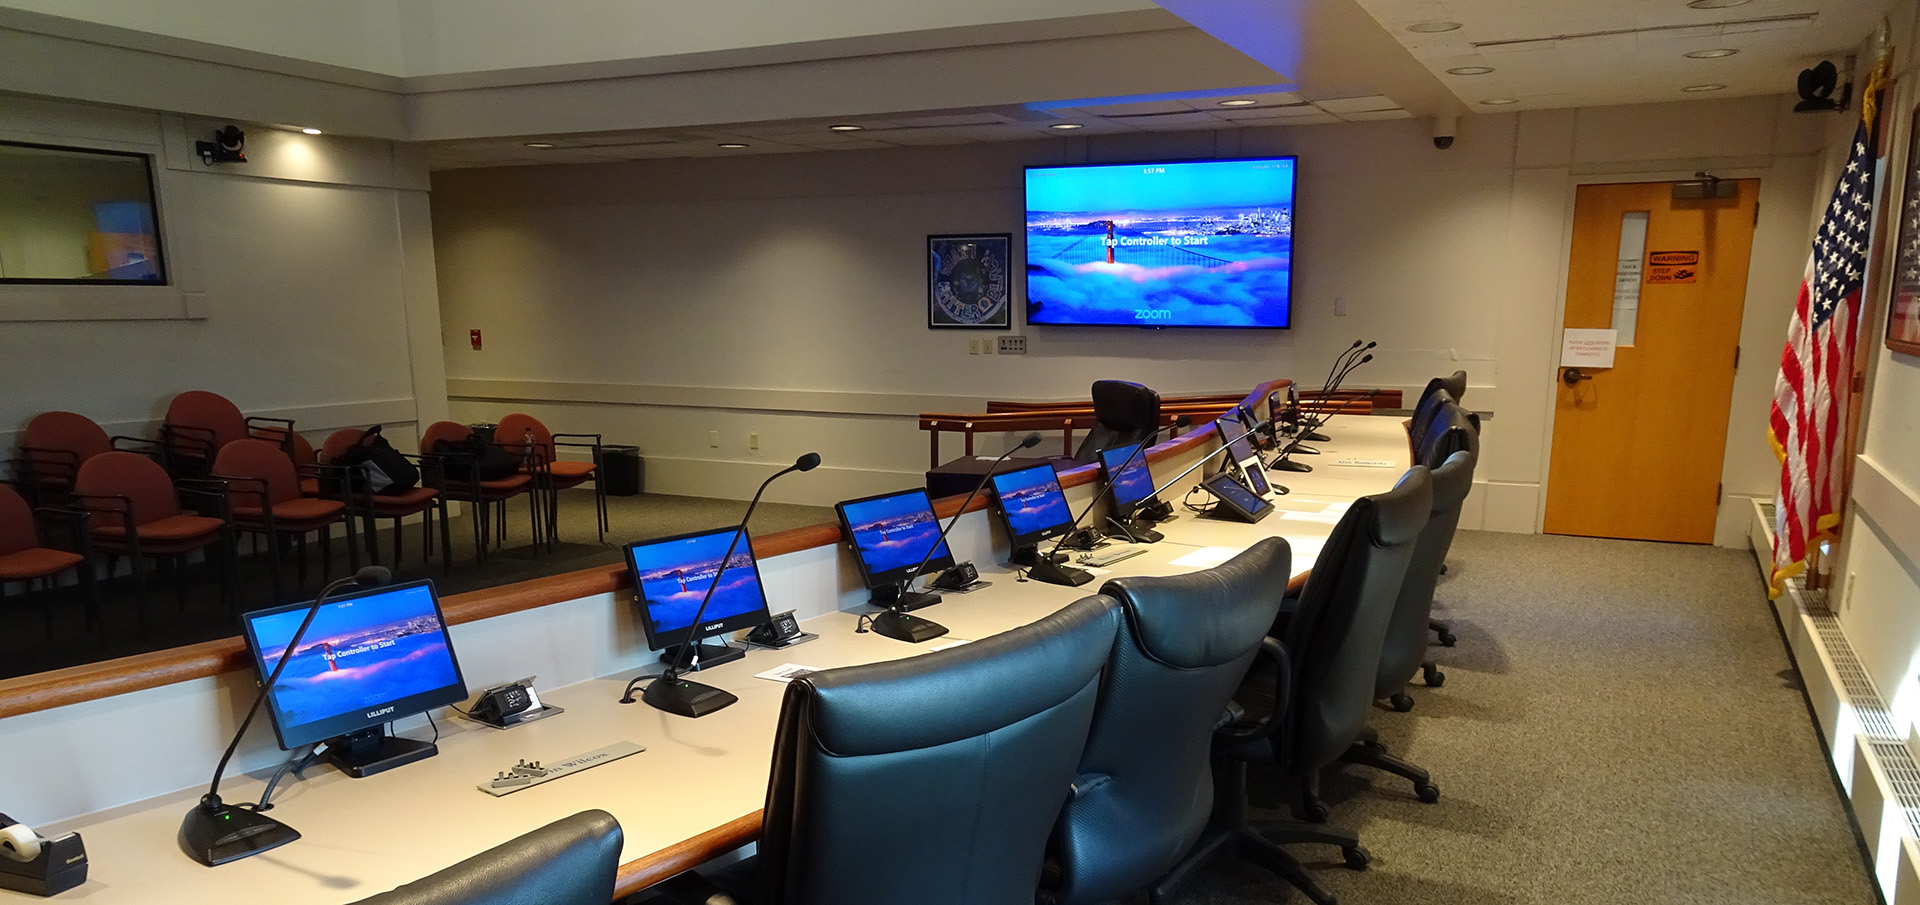 Village Council Chamber for public hearings – Broadcast to local access TV – Webinars – Budget conscious upgrade from pre